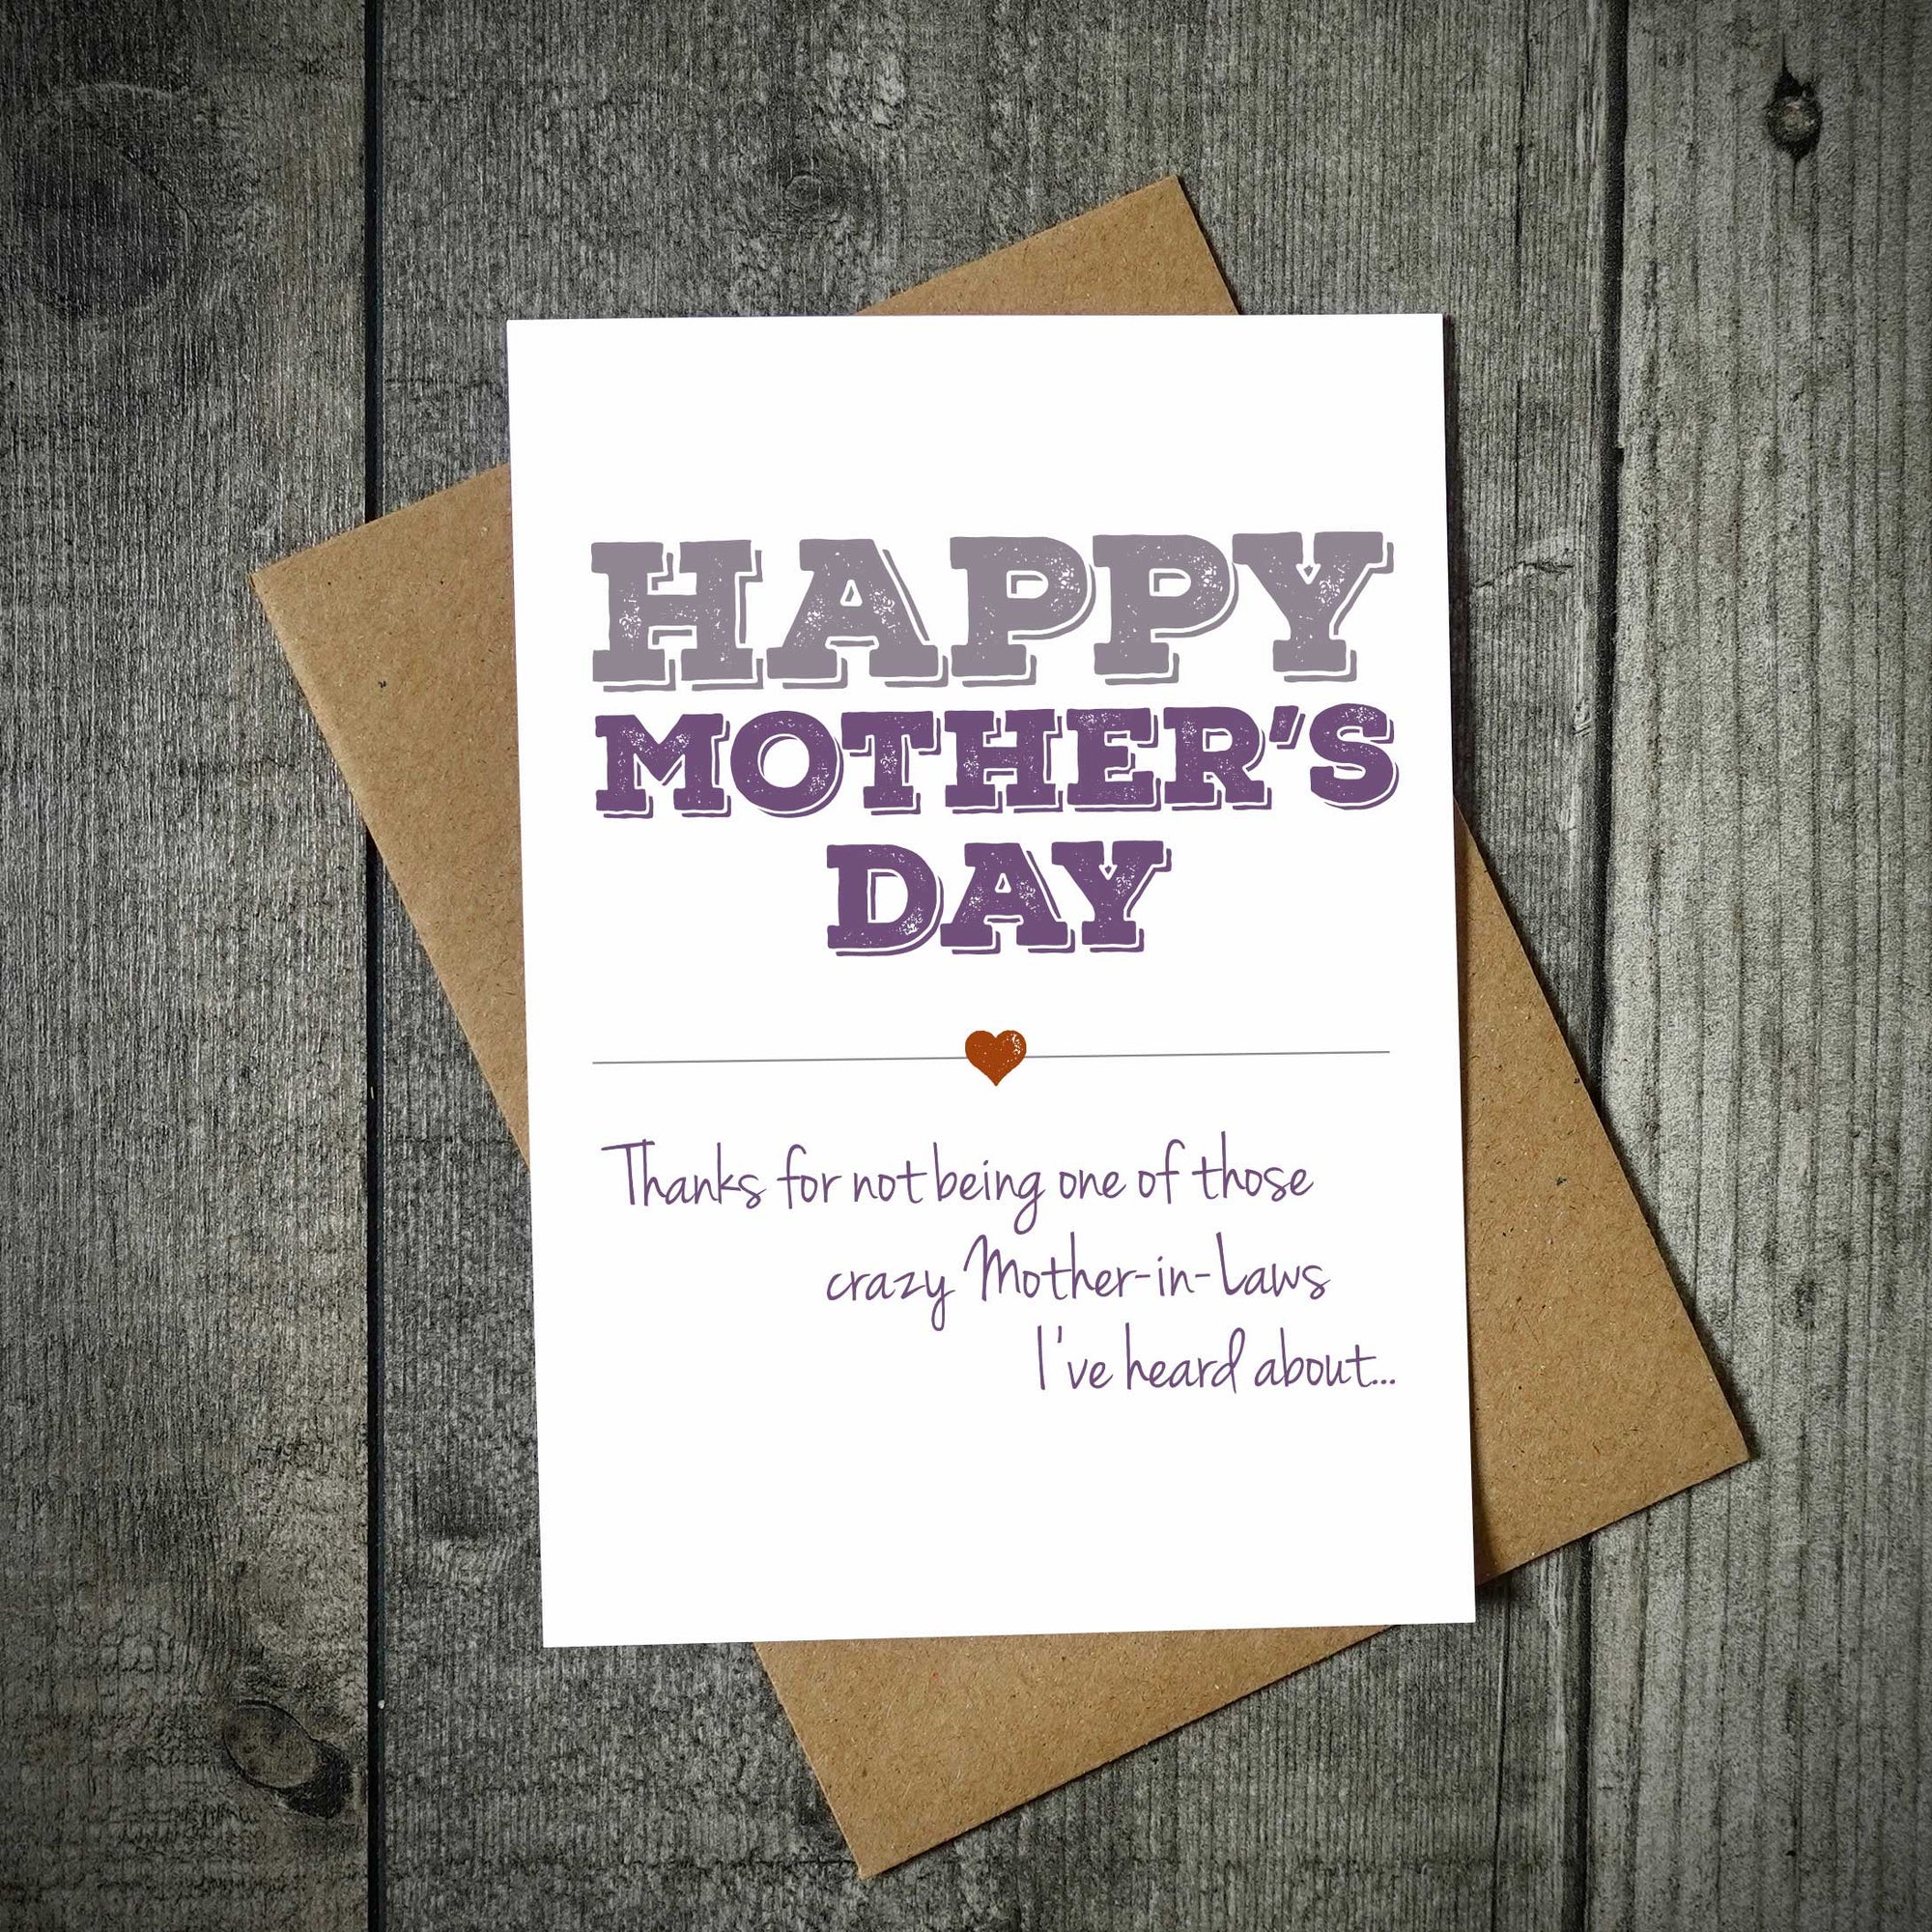 Happy Mother's Day Card - Crazy Mother-in-Law